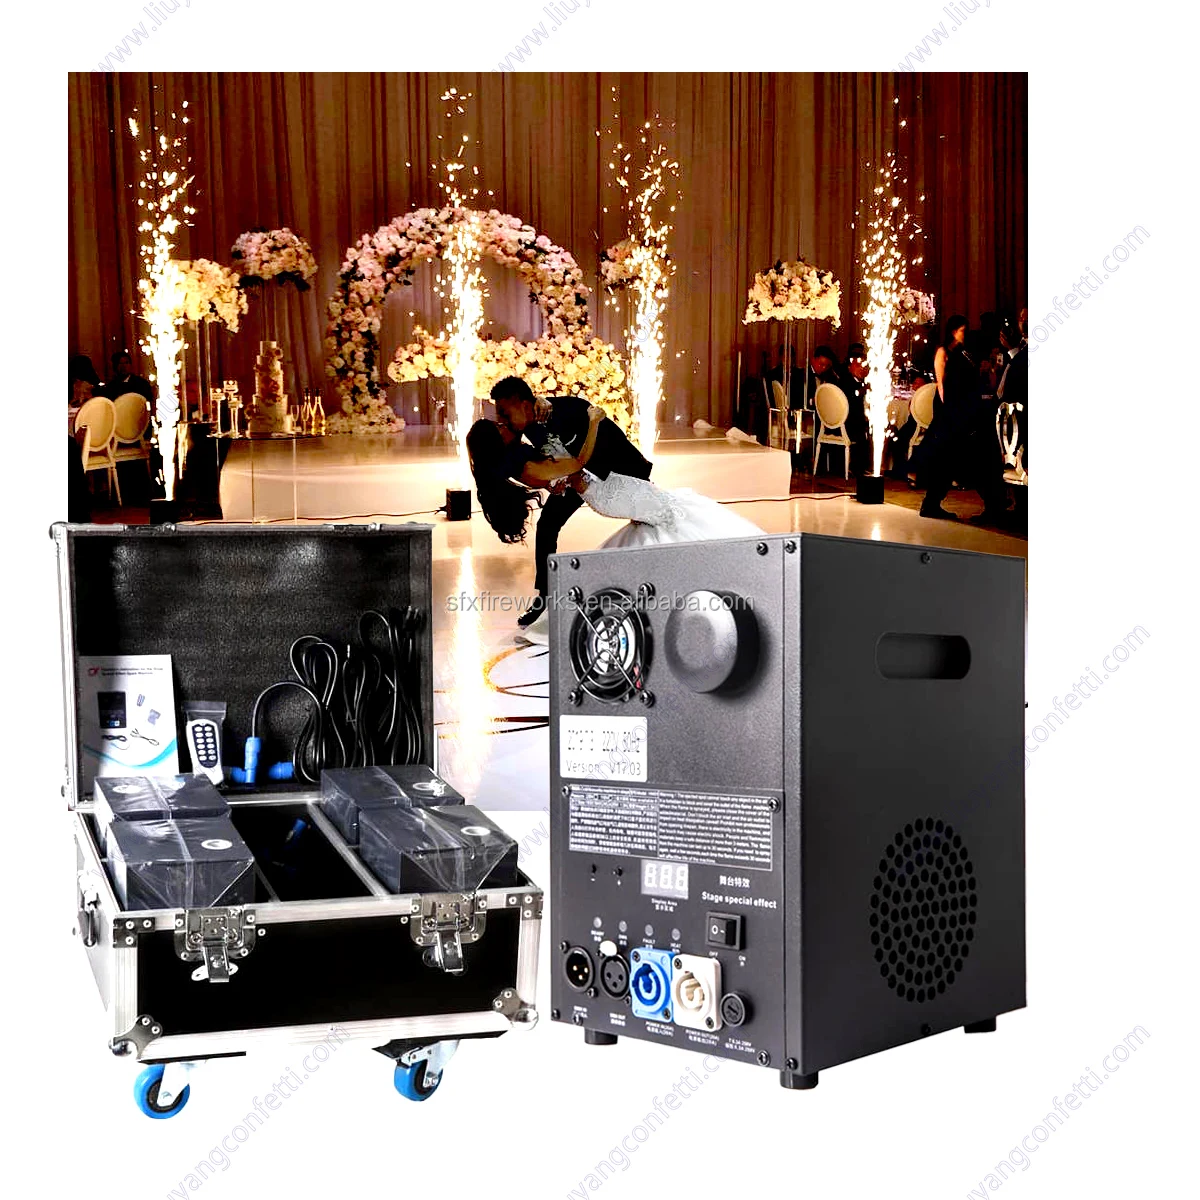 1Pc Indoor Outdoor 500W Cold Spark Firework Machine Stage Special Effect DMX Machine For DJ Wedding Event Party Ceremony Concert Show Fixture P/N: ET-TOOL012-RAW HTTMT- 